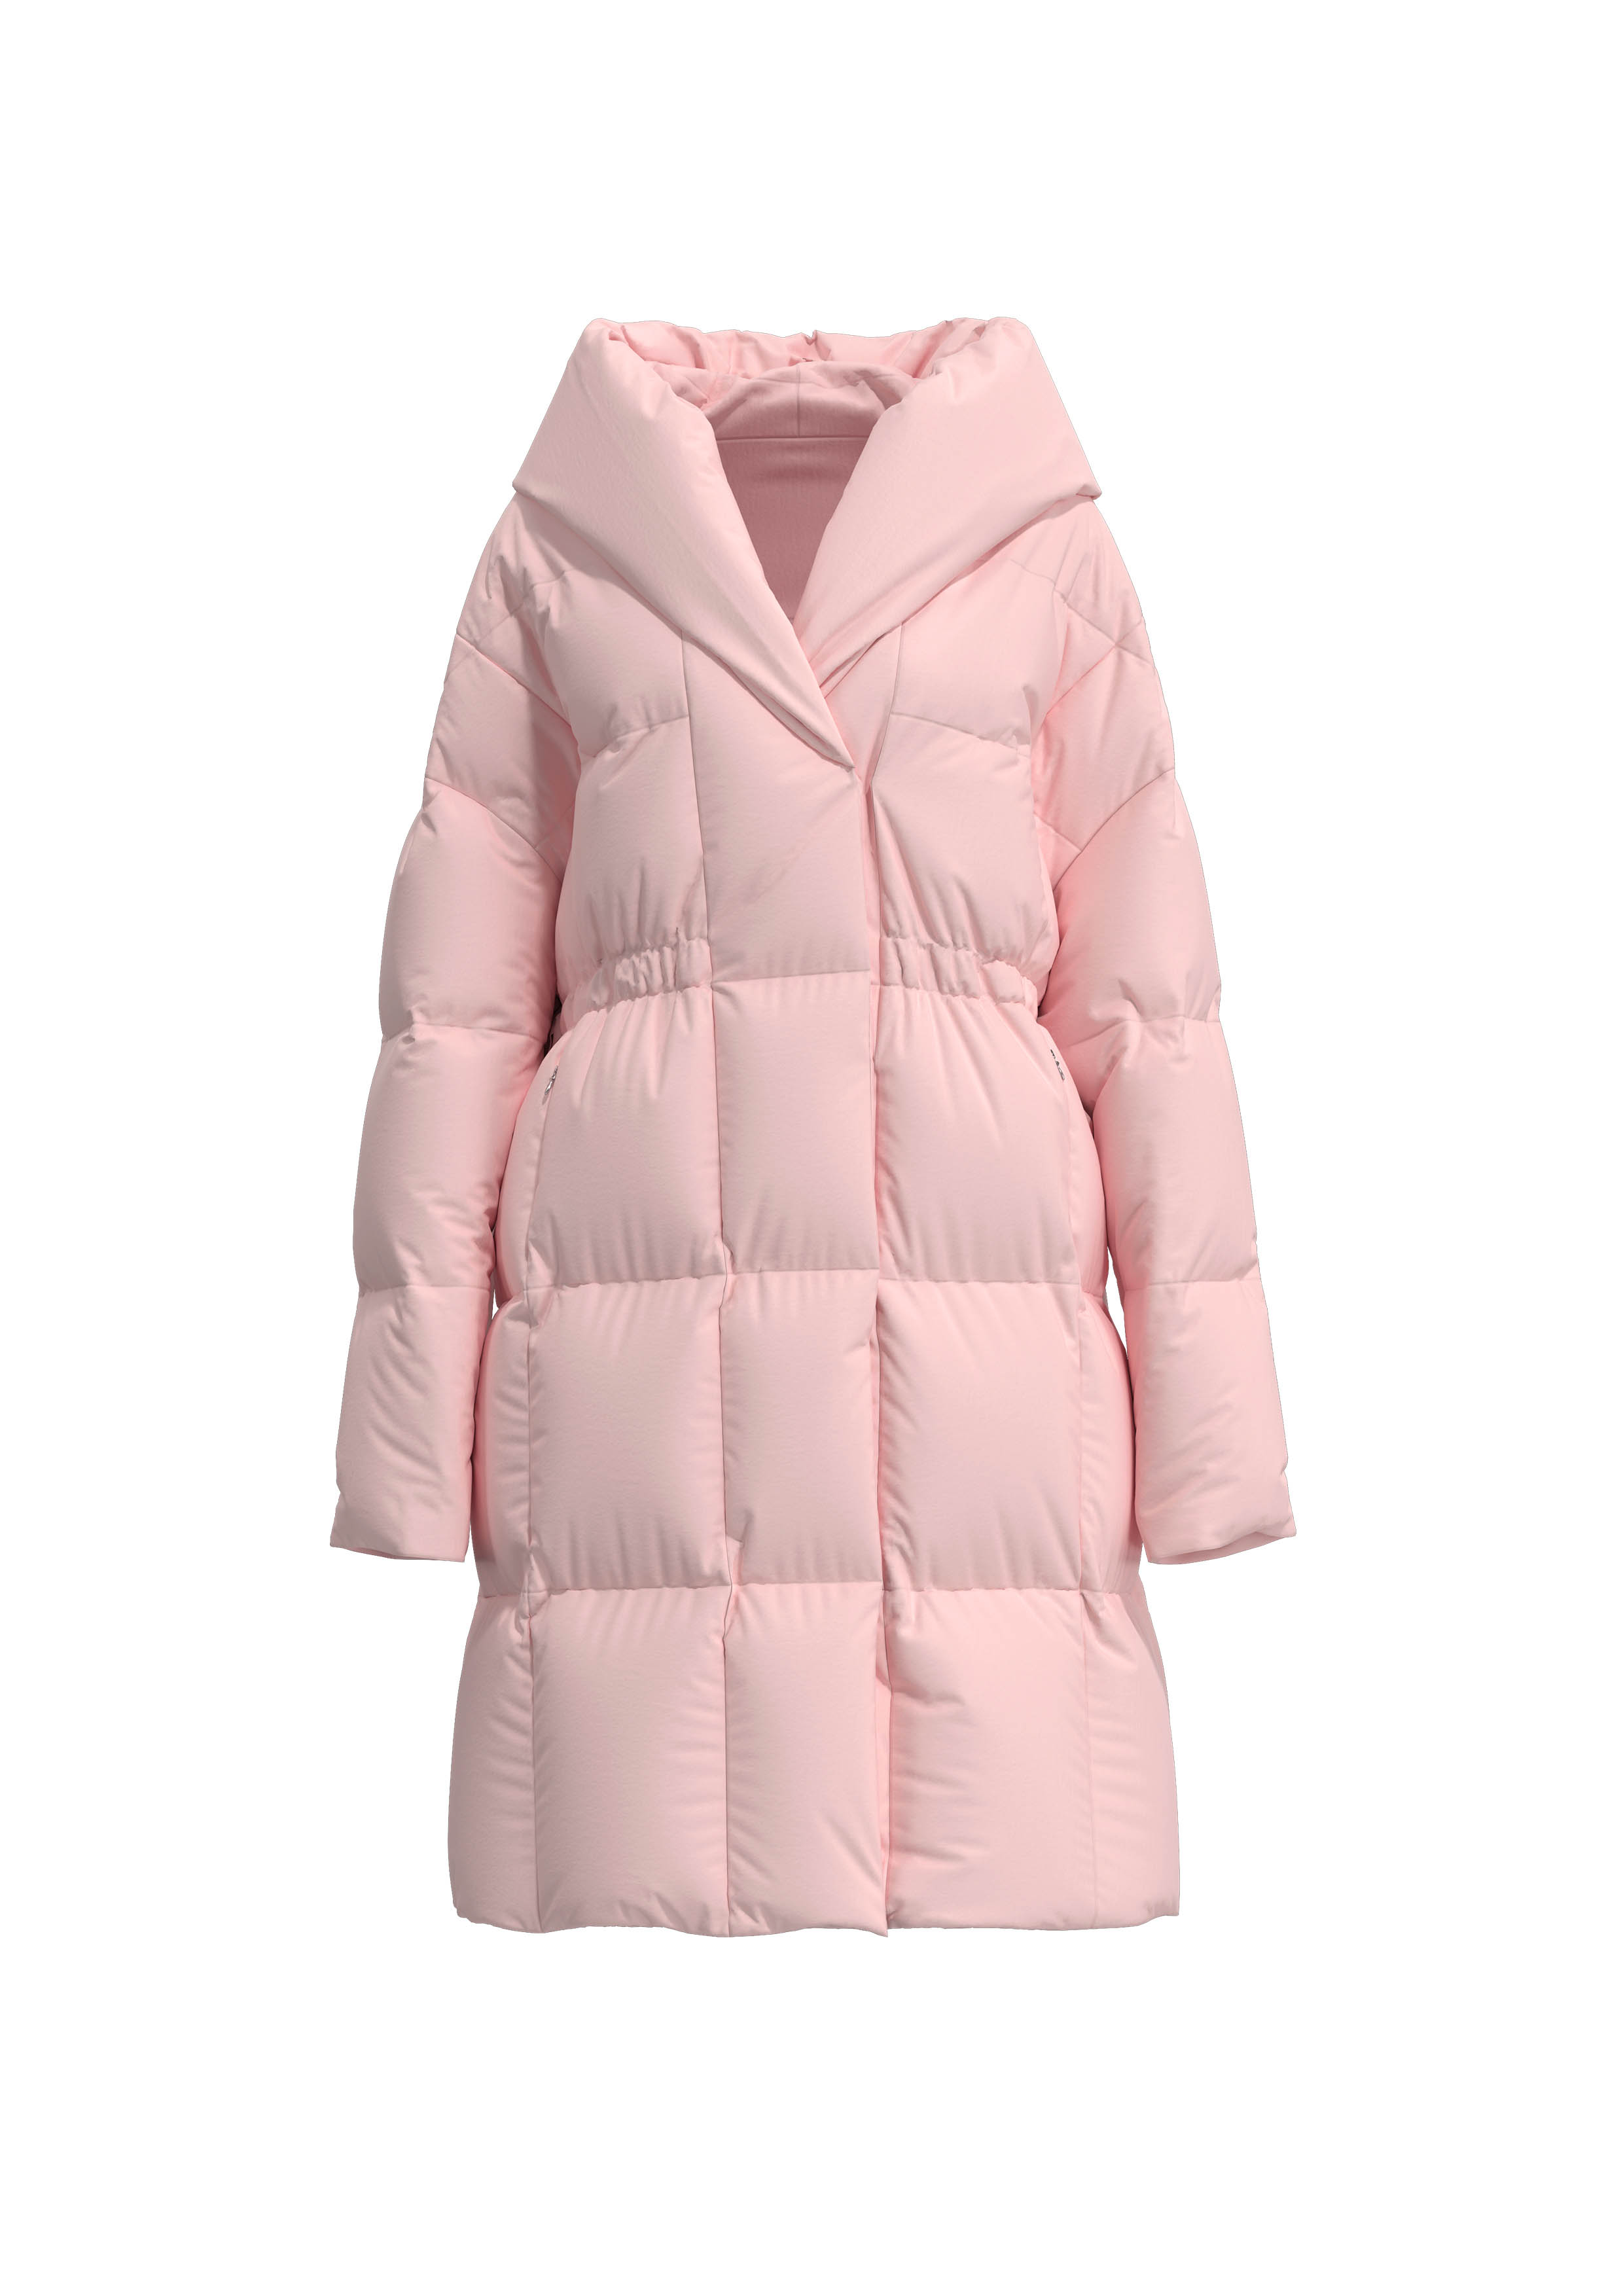 Lady's Fluffy down jacket